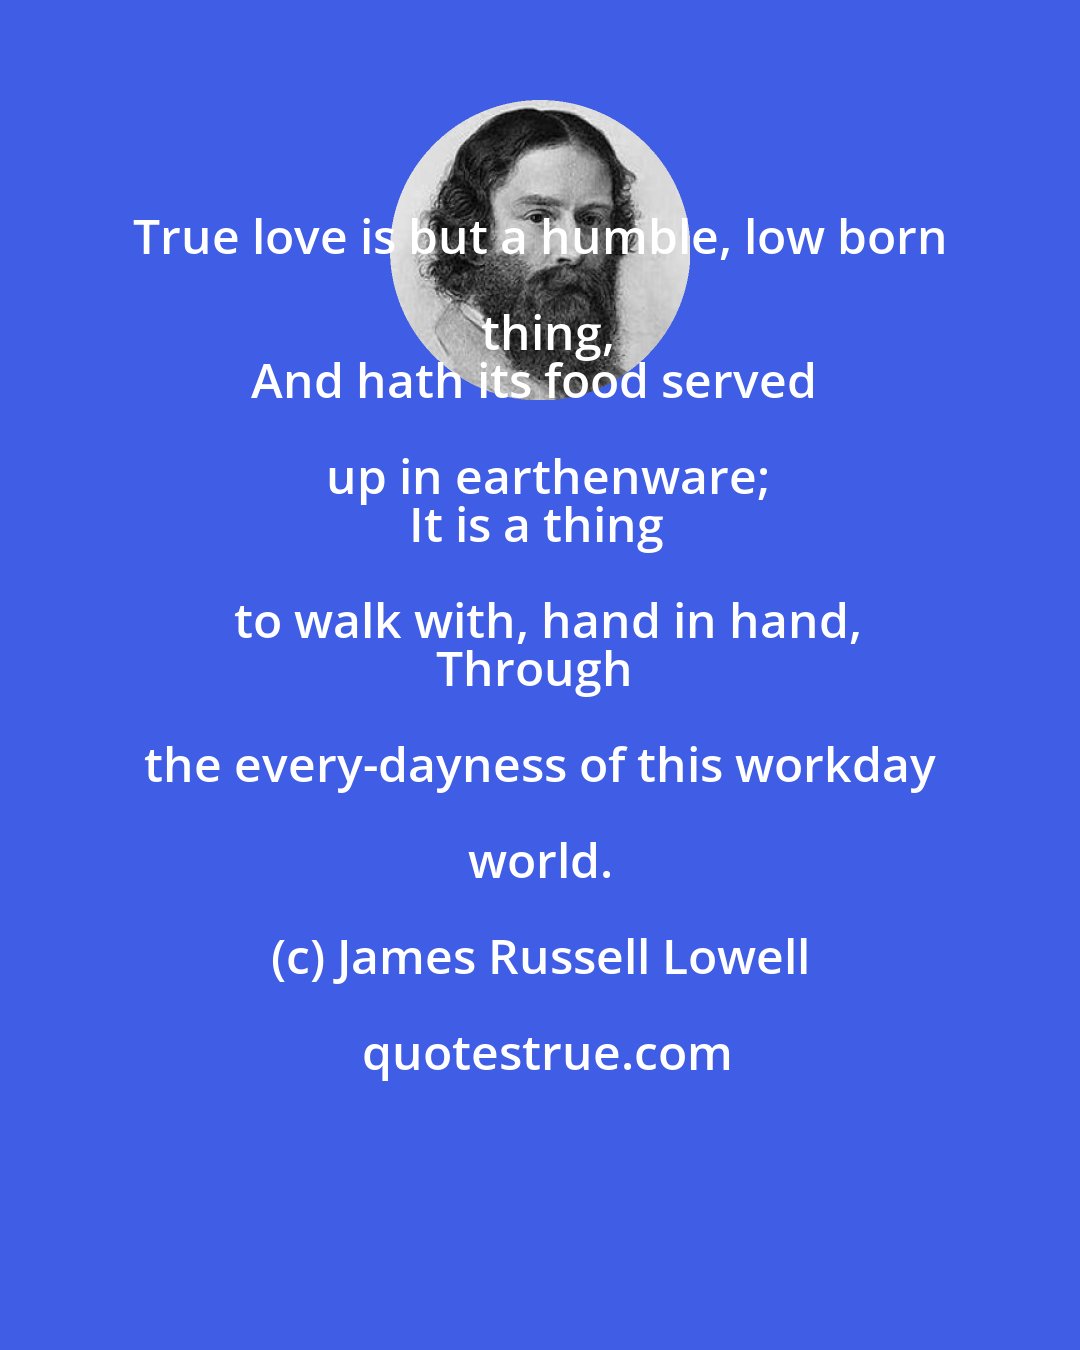 James Russell Lowell: True love is but a humble, low born thing,
And hath its food served up in earthenware;
It is a thing to walk with, hand in hand,
Through the every-dayness of this workday world.